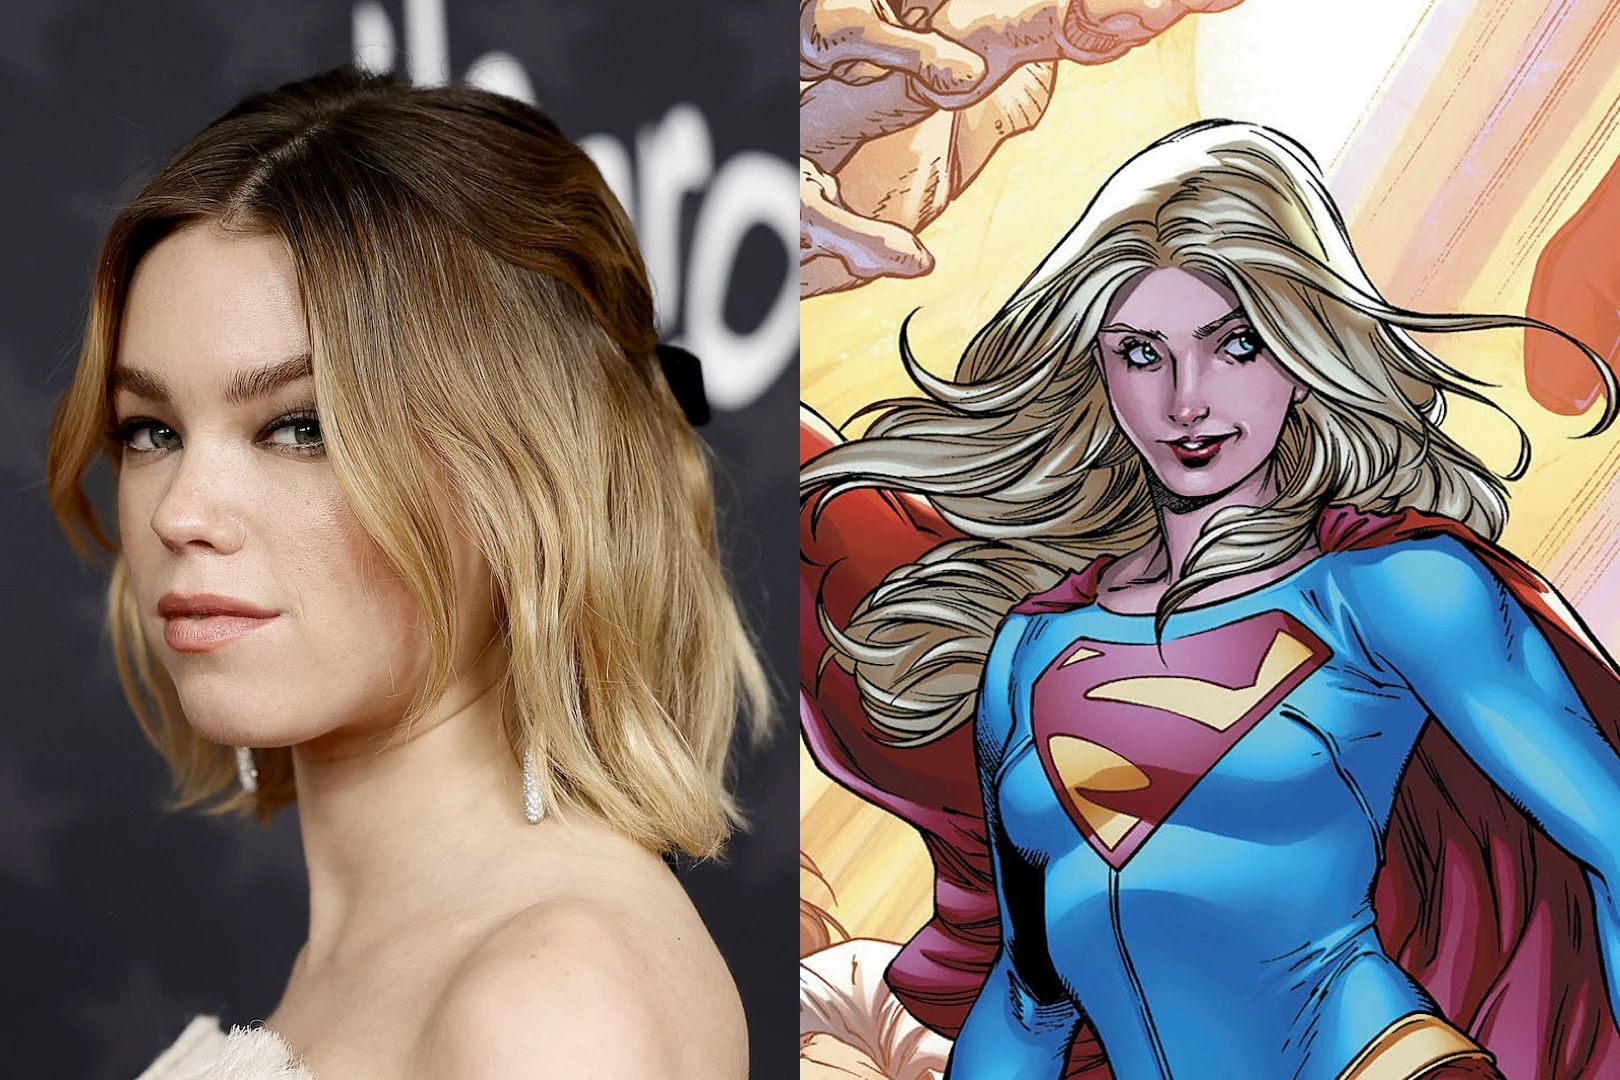 'Supergirl' Will Be the Second Film in James Gunn's DC Universe